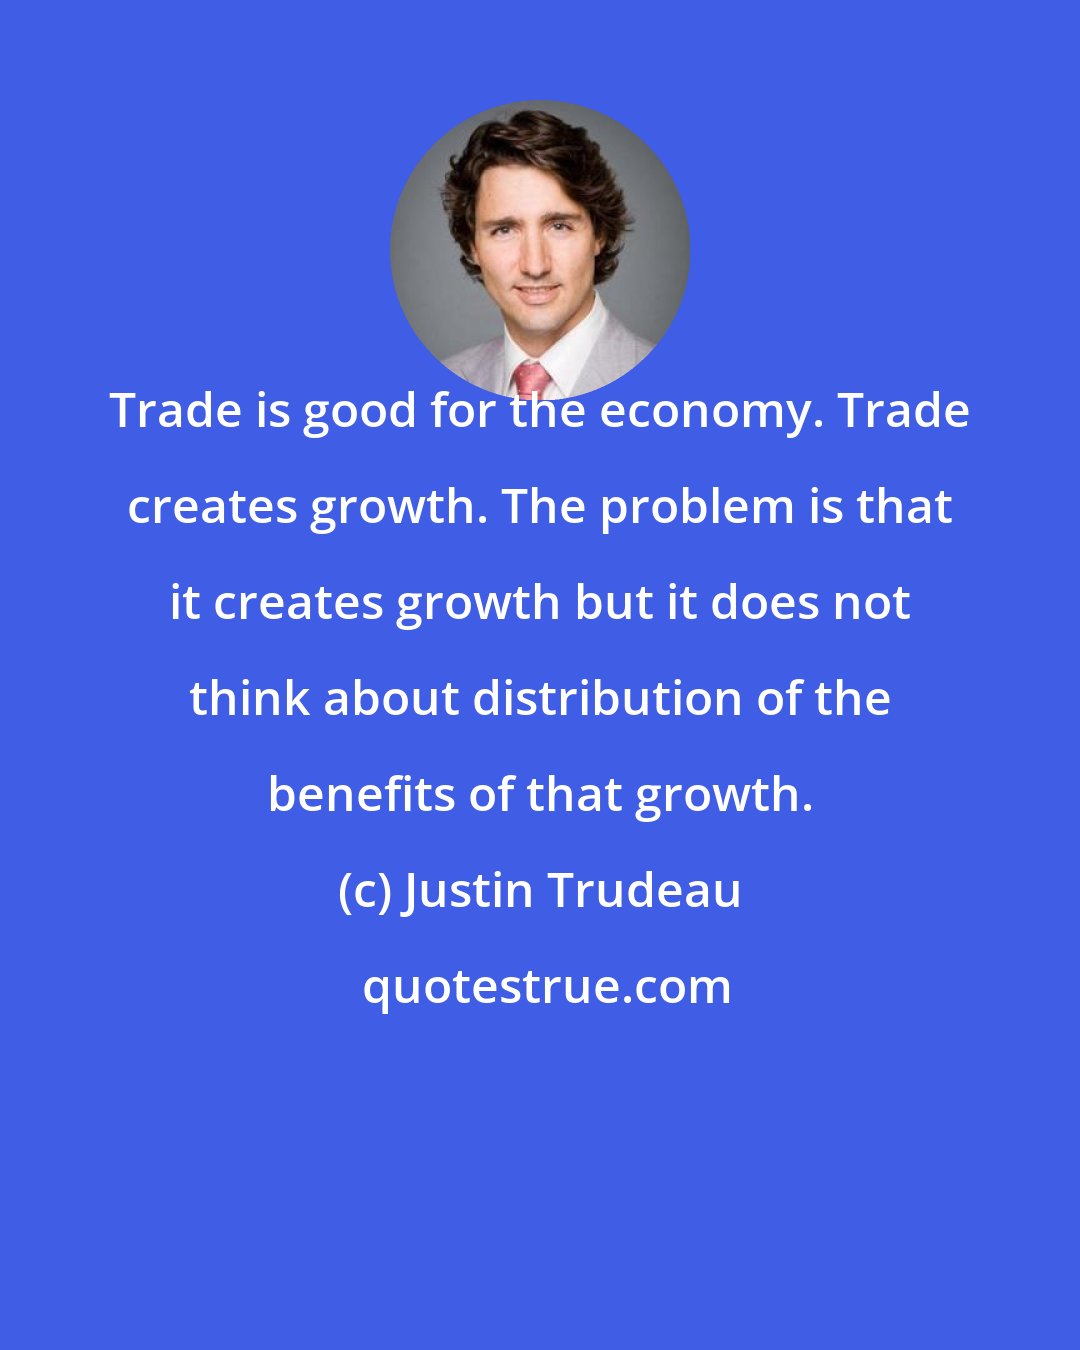 Justin Trudeau: Trade is good for the economy. Trade creates growth. The problem is that it creates growth but it does not think about distribution of the benefits of that growth.